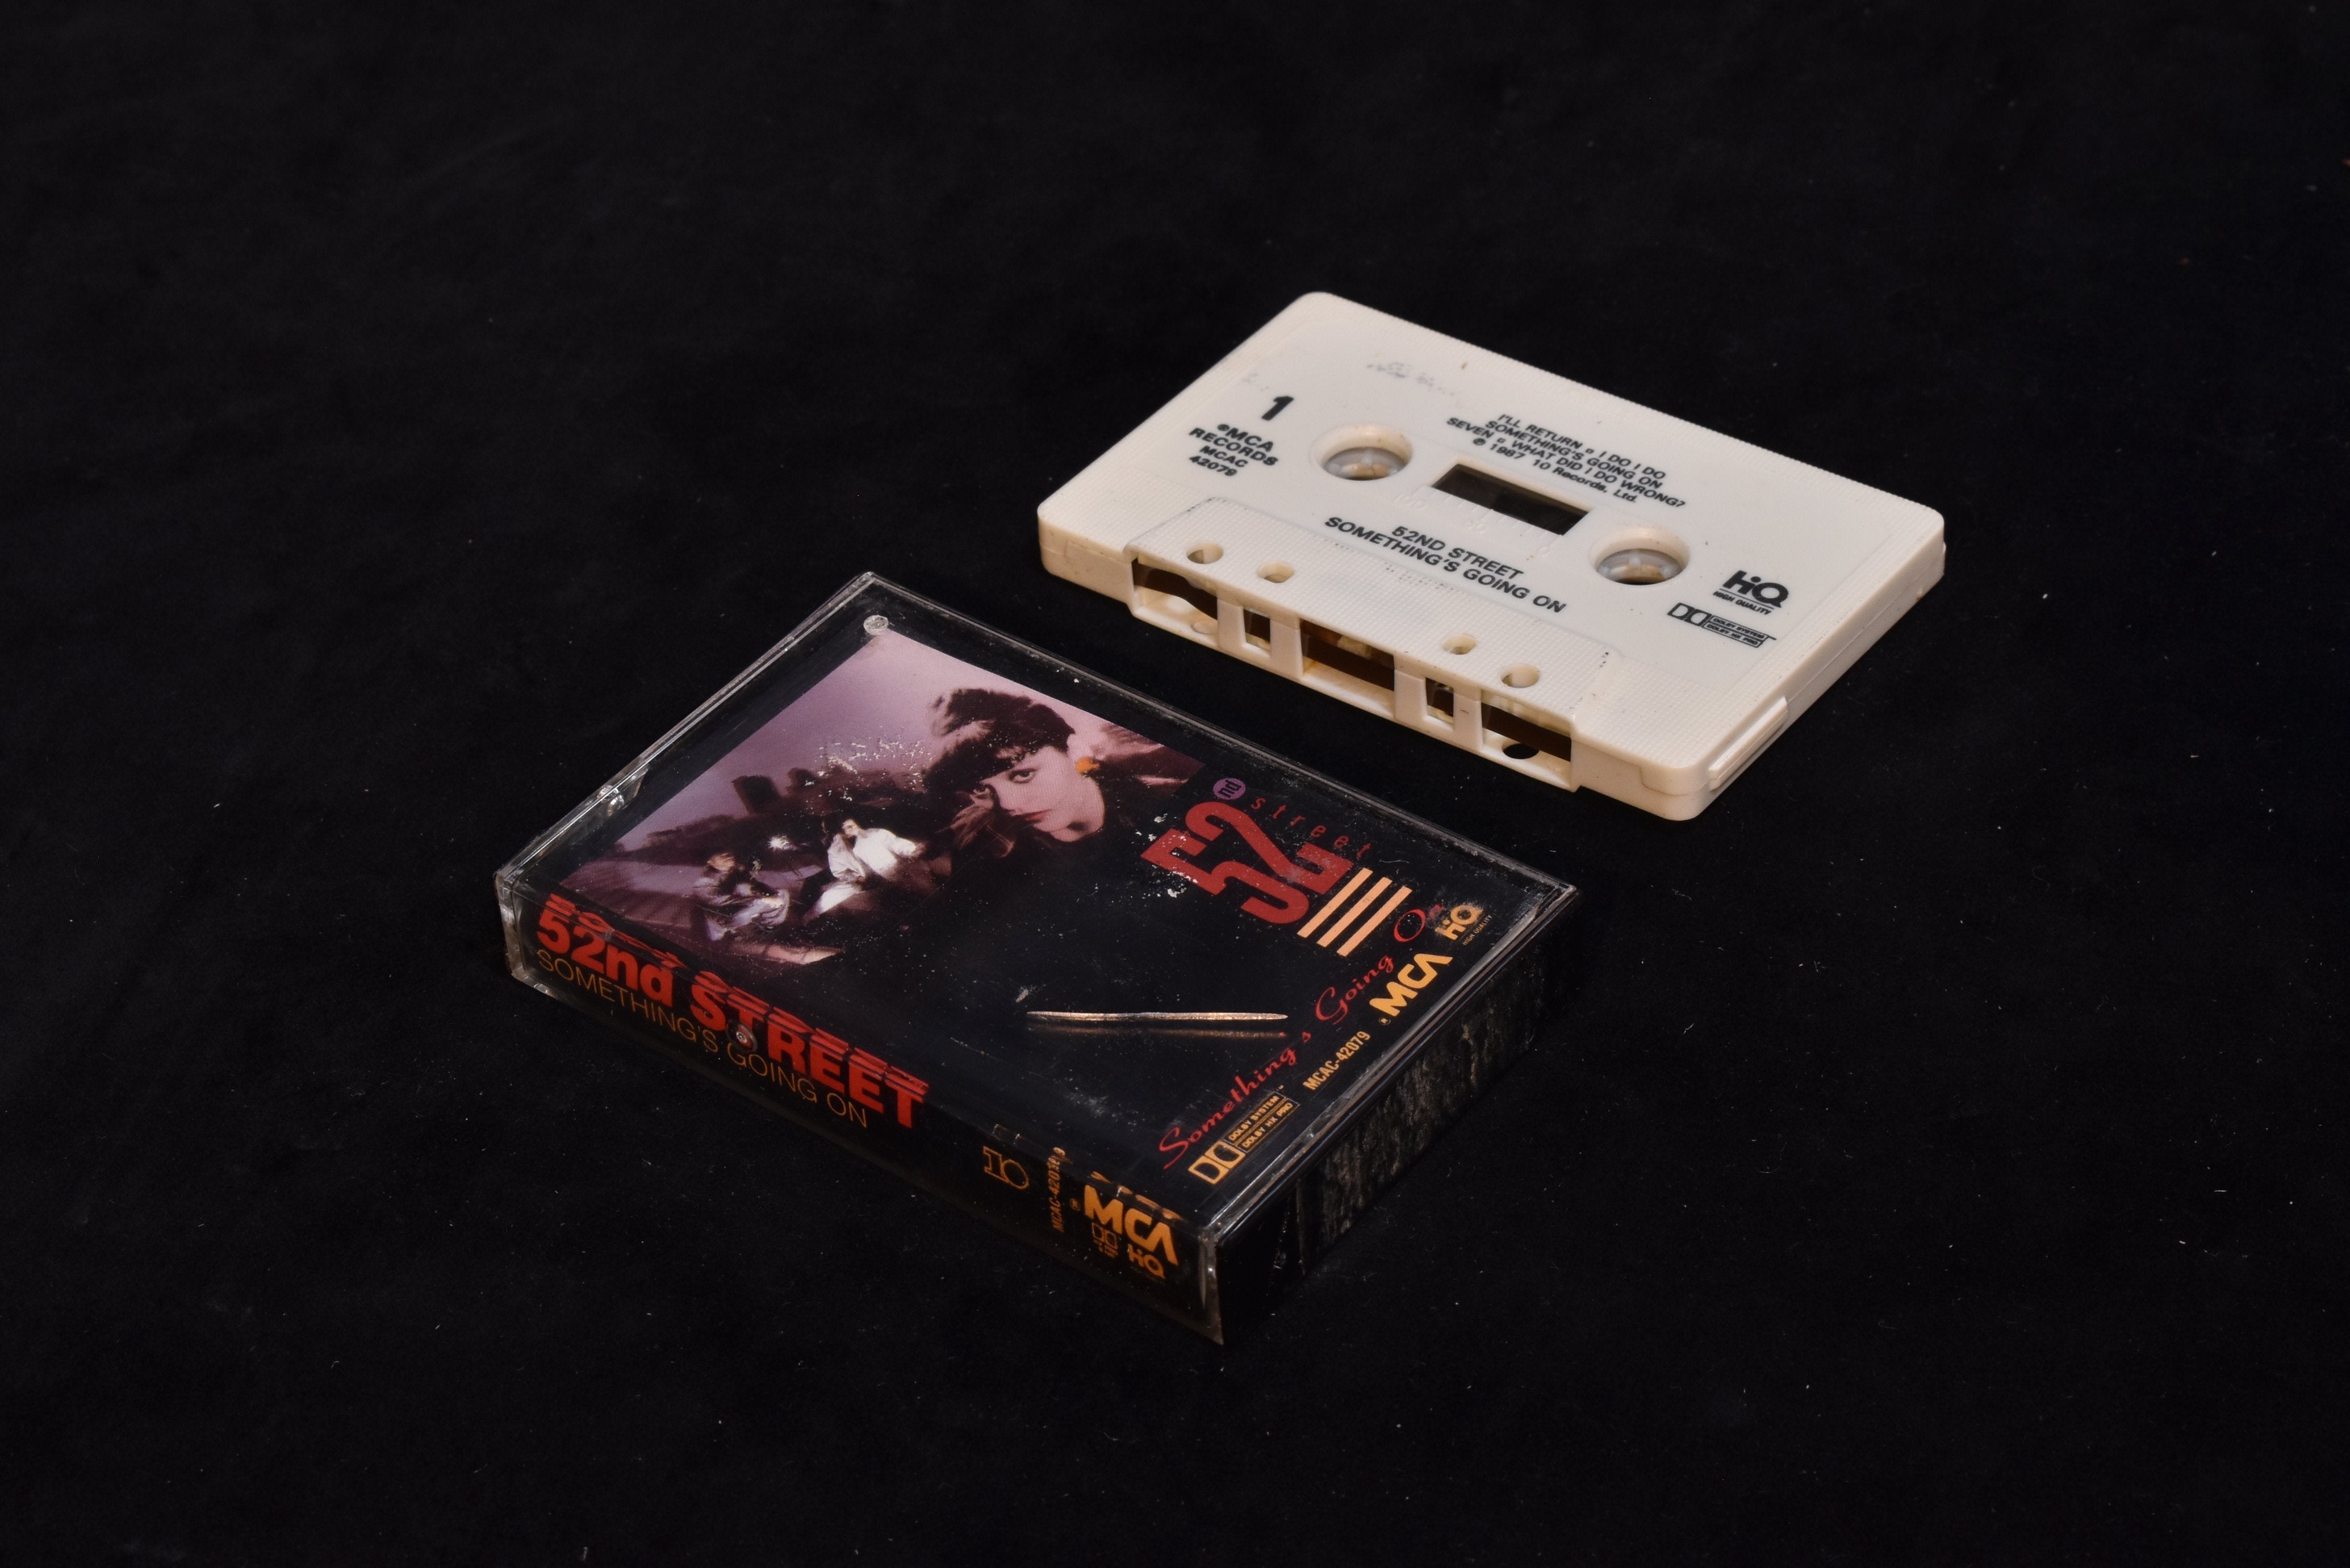 52nd St. somethings going on cassette tape used